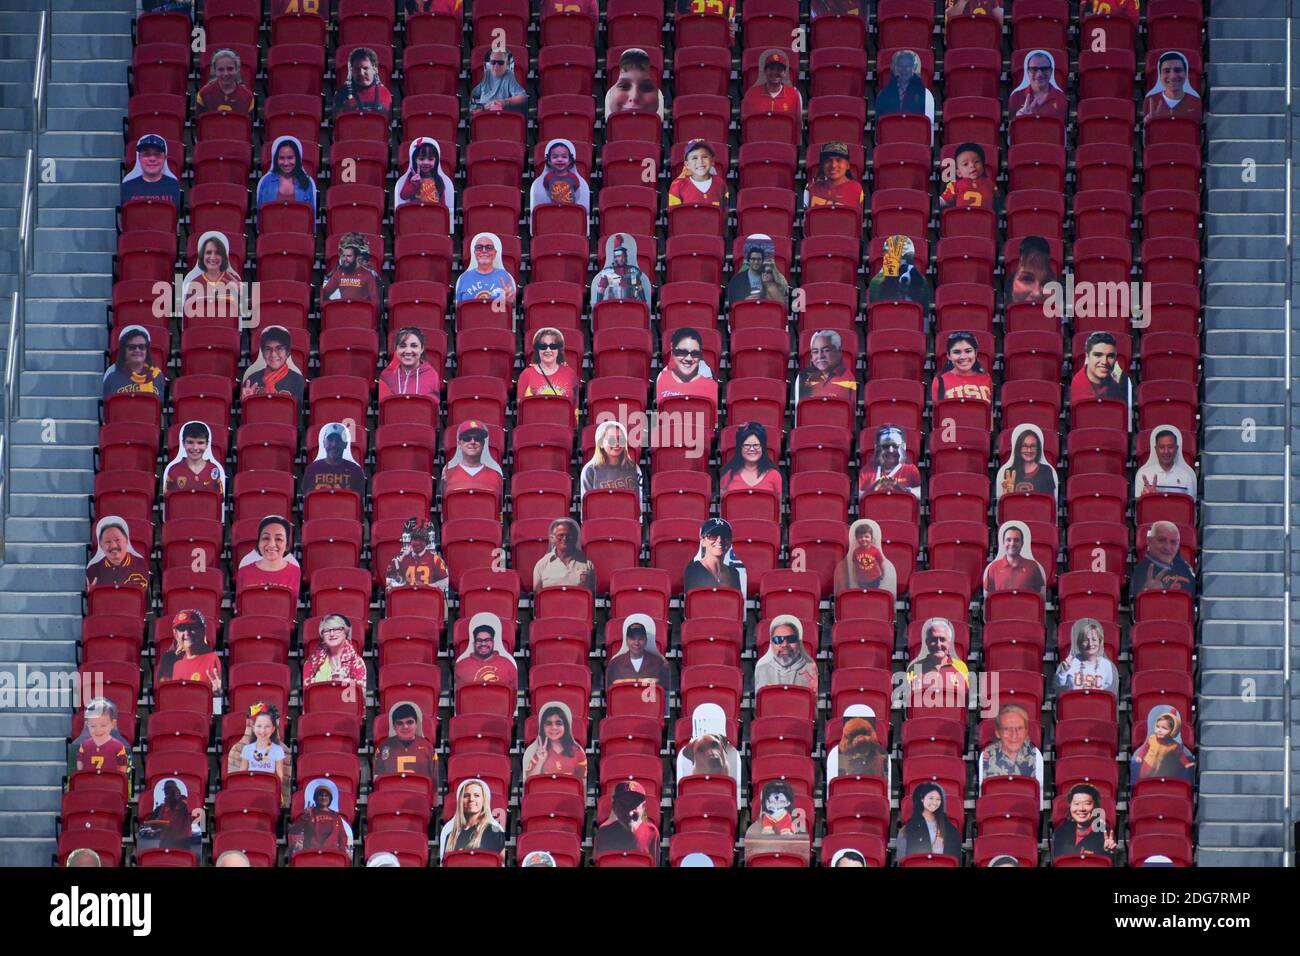 Cardboard cutouts of fans are seen in the stands of the Los Angeles Memorial Coliseum during an NCAA football game between the Southern California Tro Stock Photo